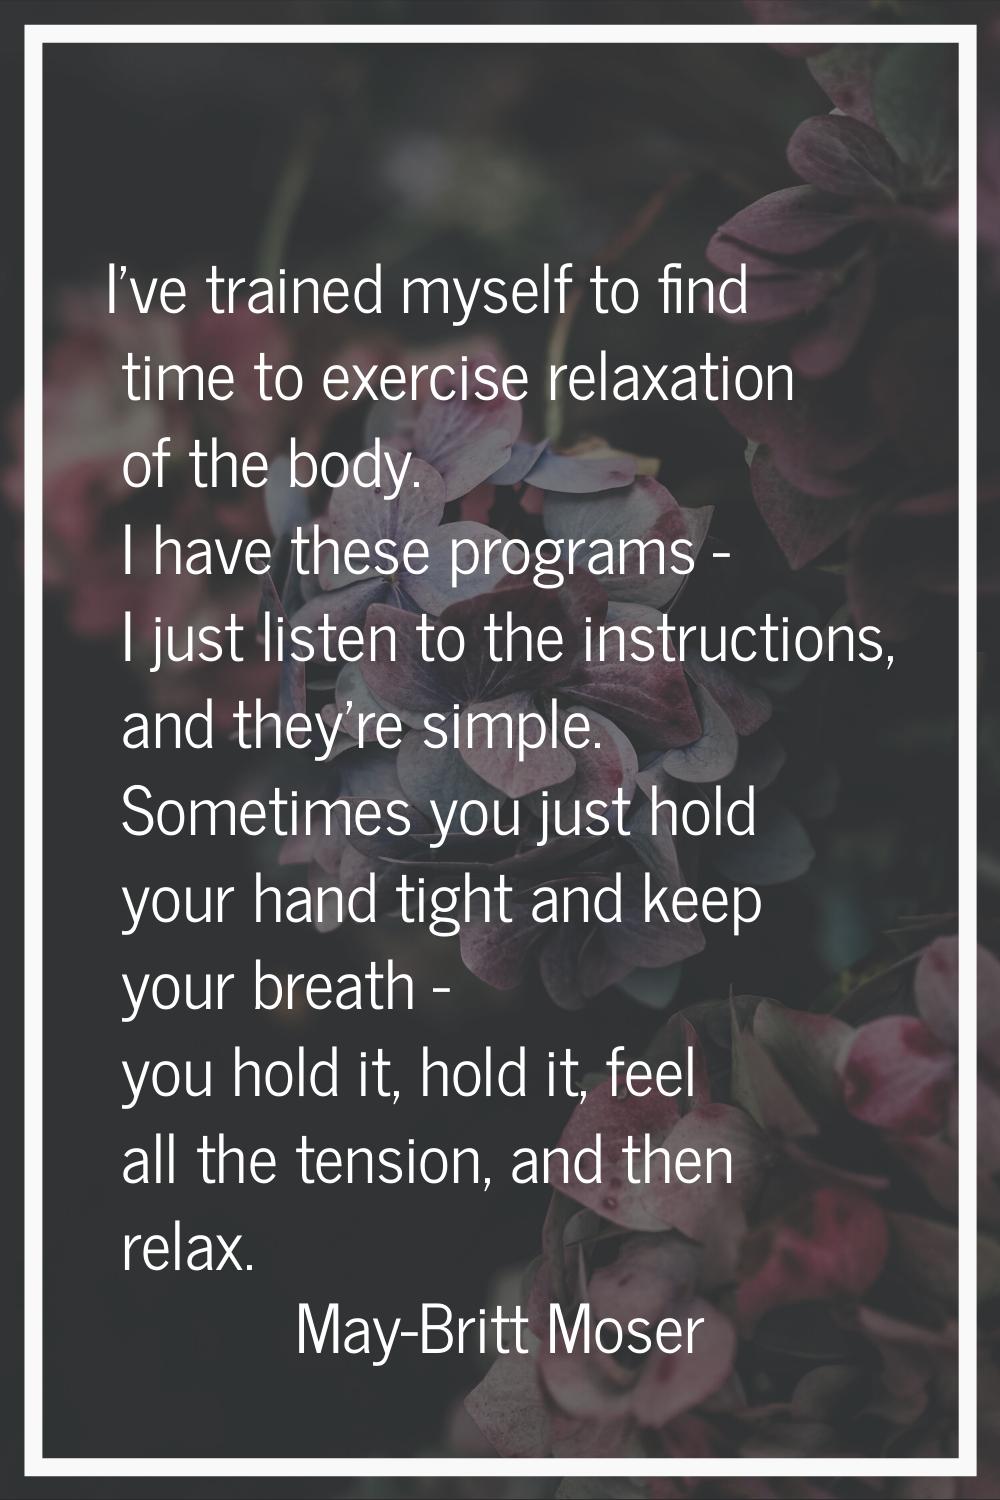 I've trained myself to find time to exercise relaxation of the body. I have these programs - I just